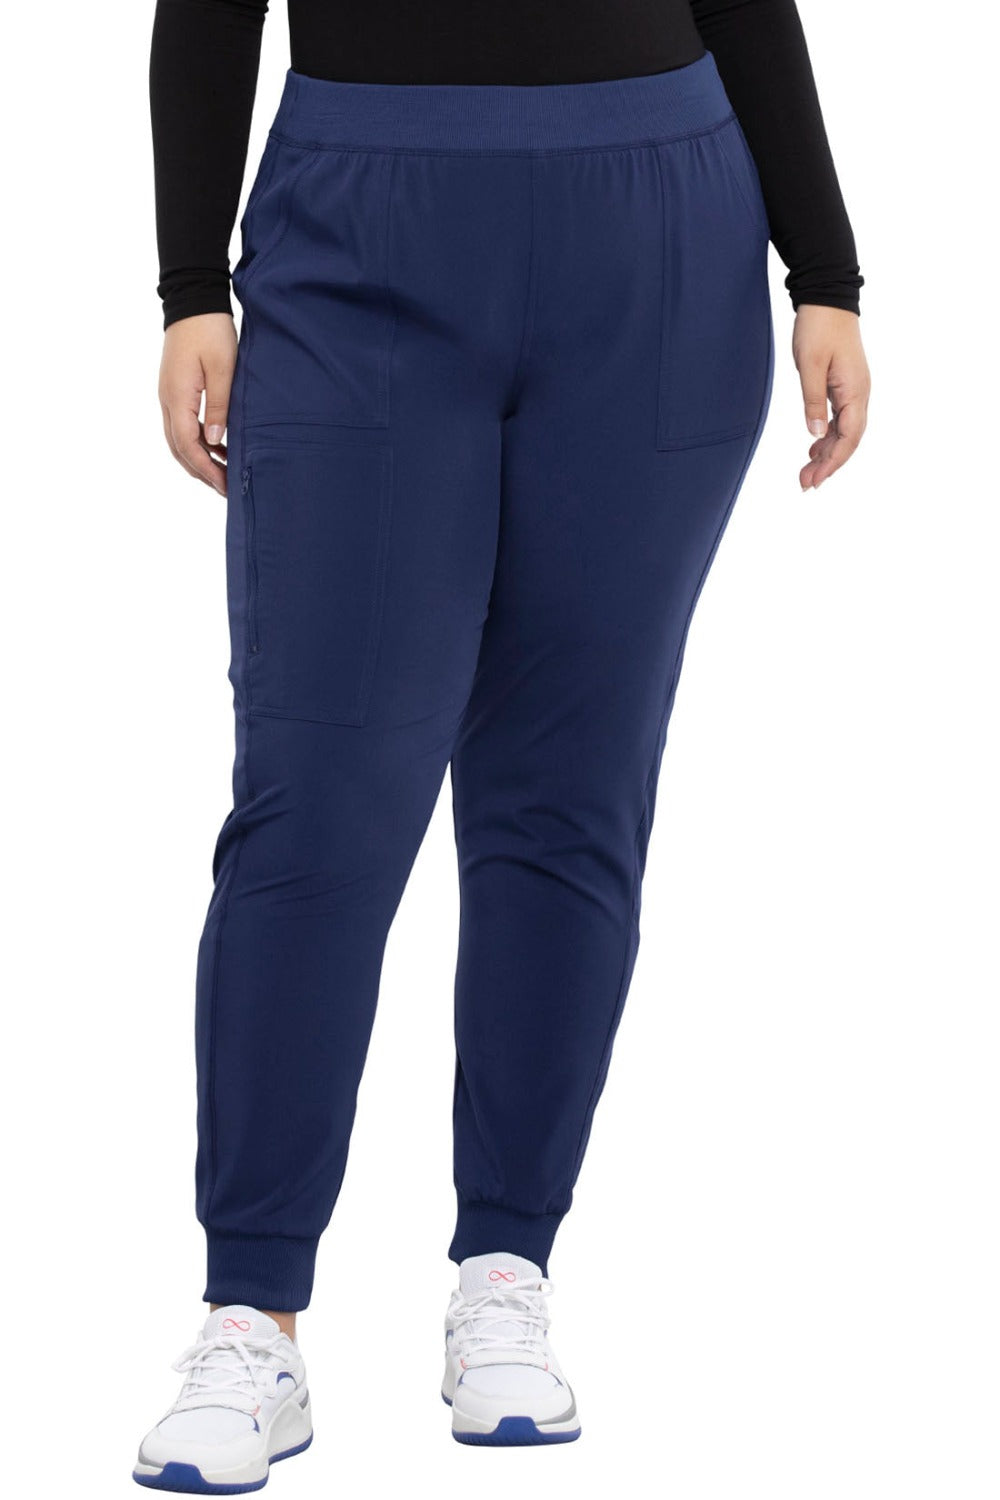 Cherokee Allura Scrub Pant Pull On Jogger in Navy at Parker's Clothing and Shoes.